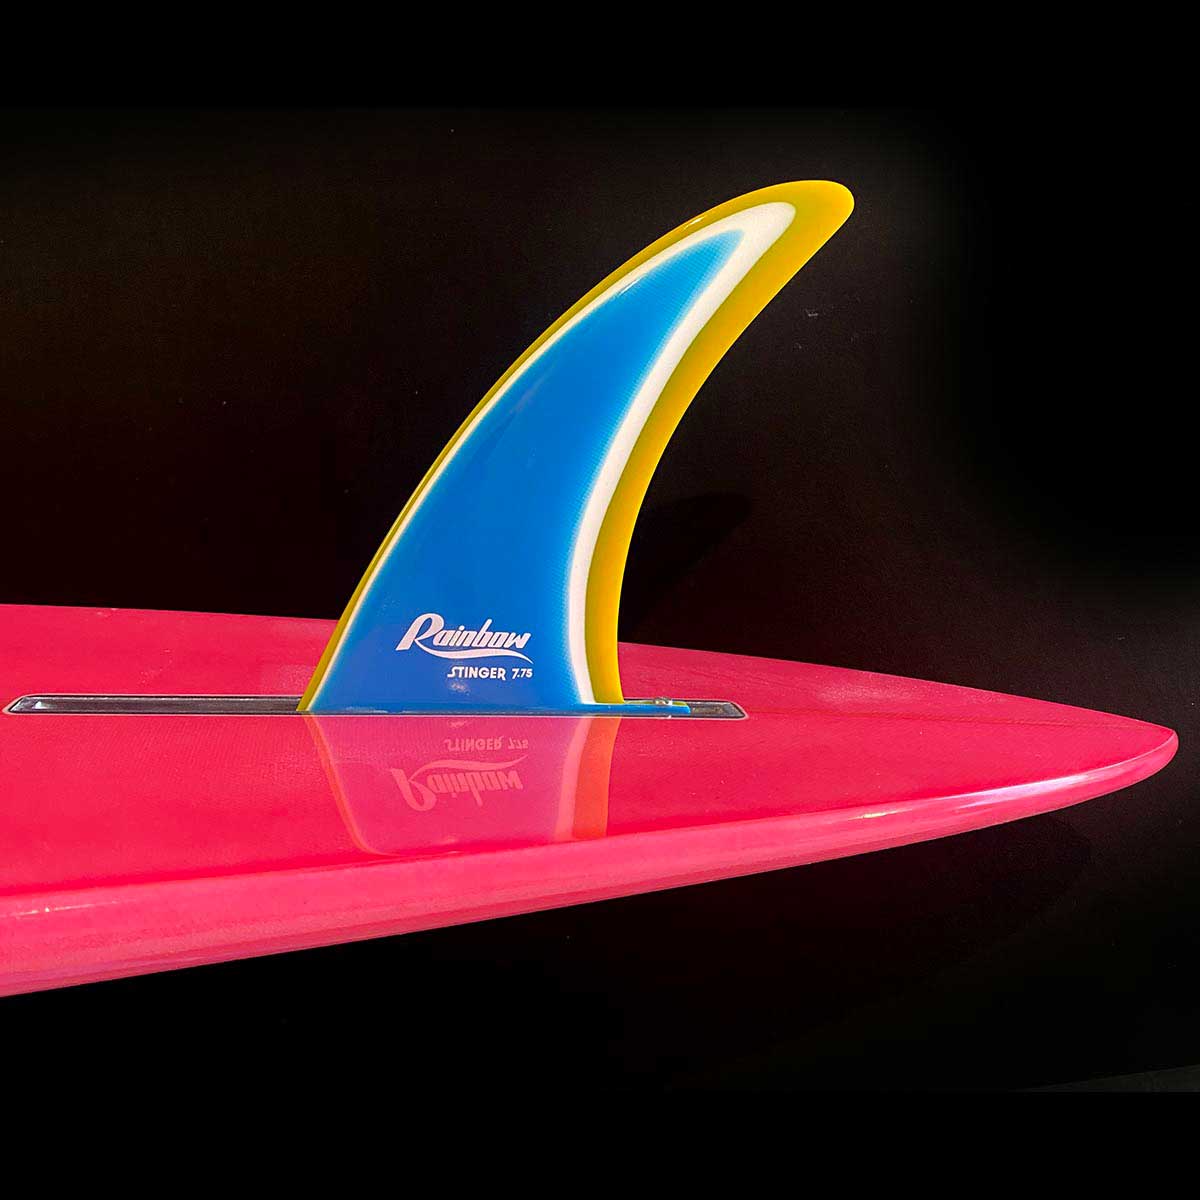 SOLD! Ocean Ohana Fine Art Surfboard - Hand Shaped by Gerry Lopez & Hand Painted by Drew Brophy